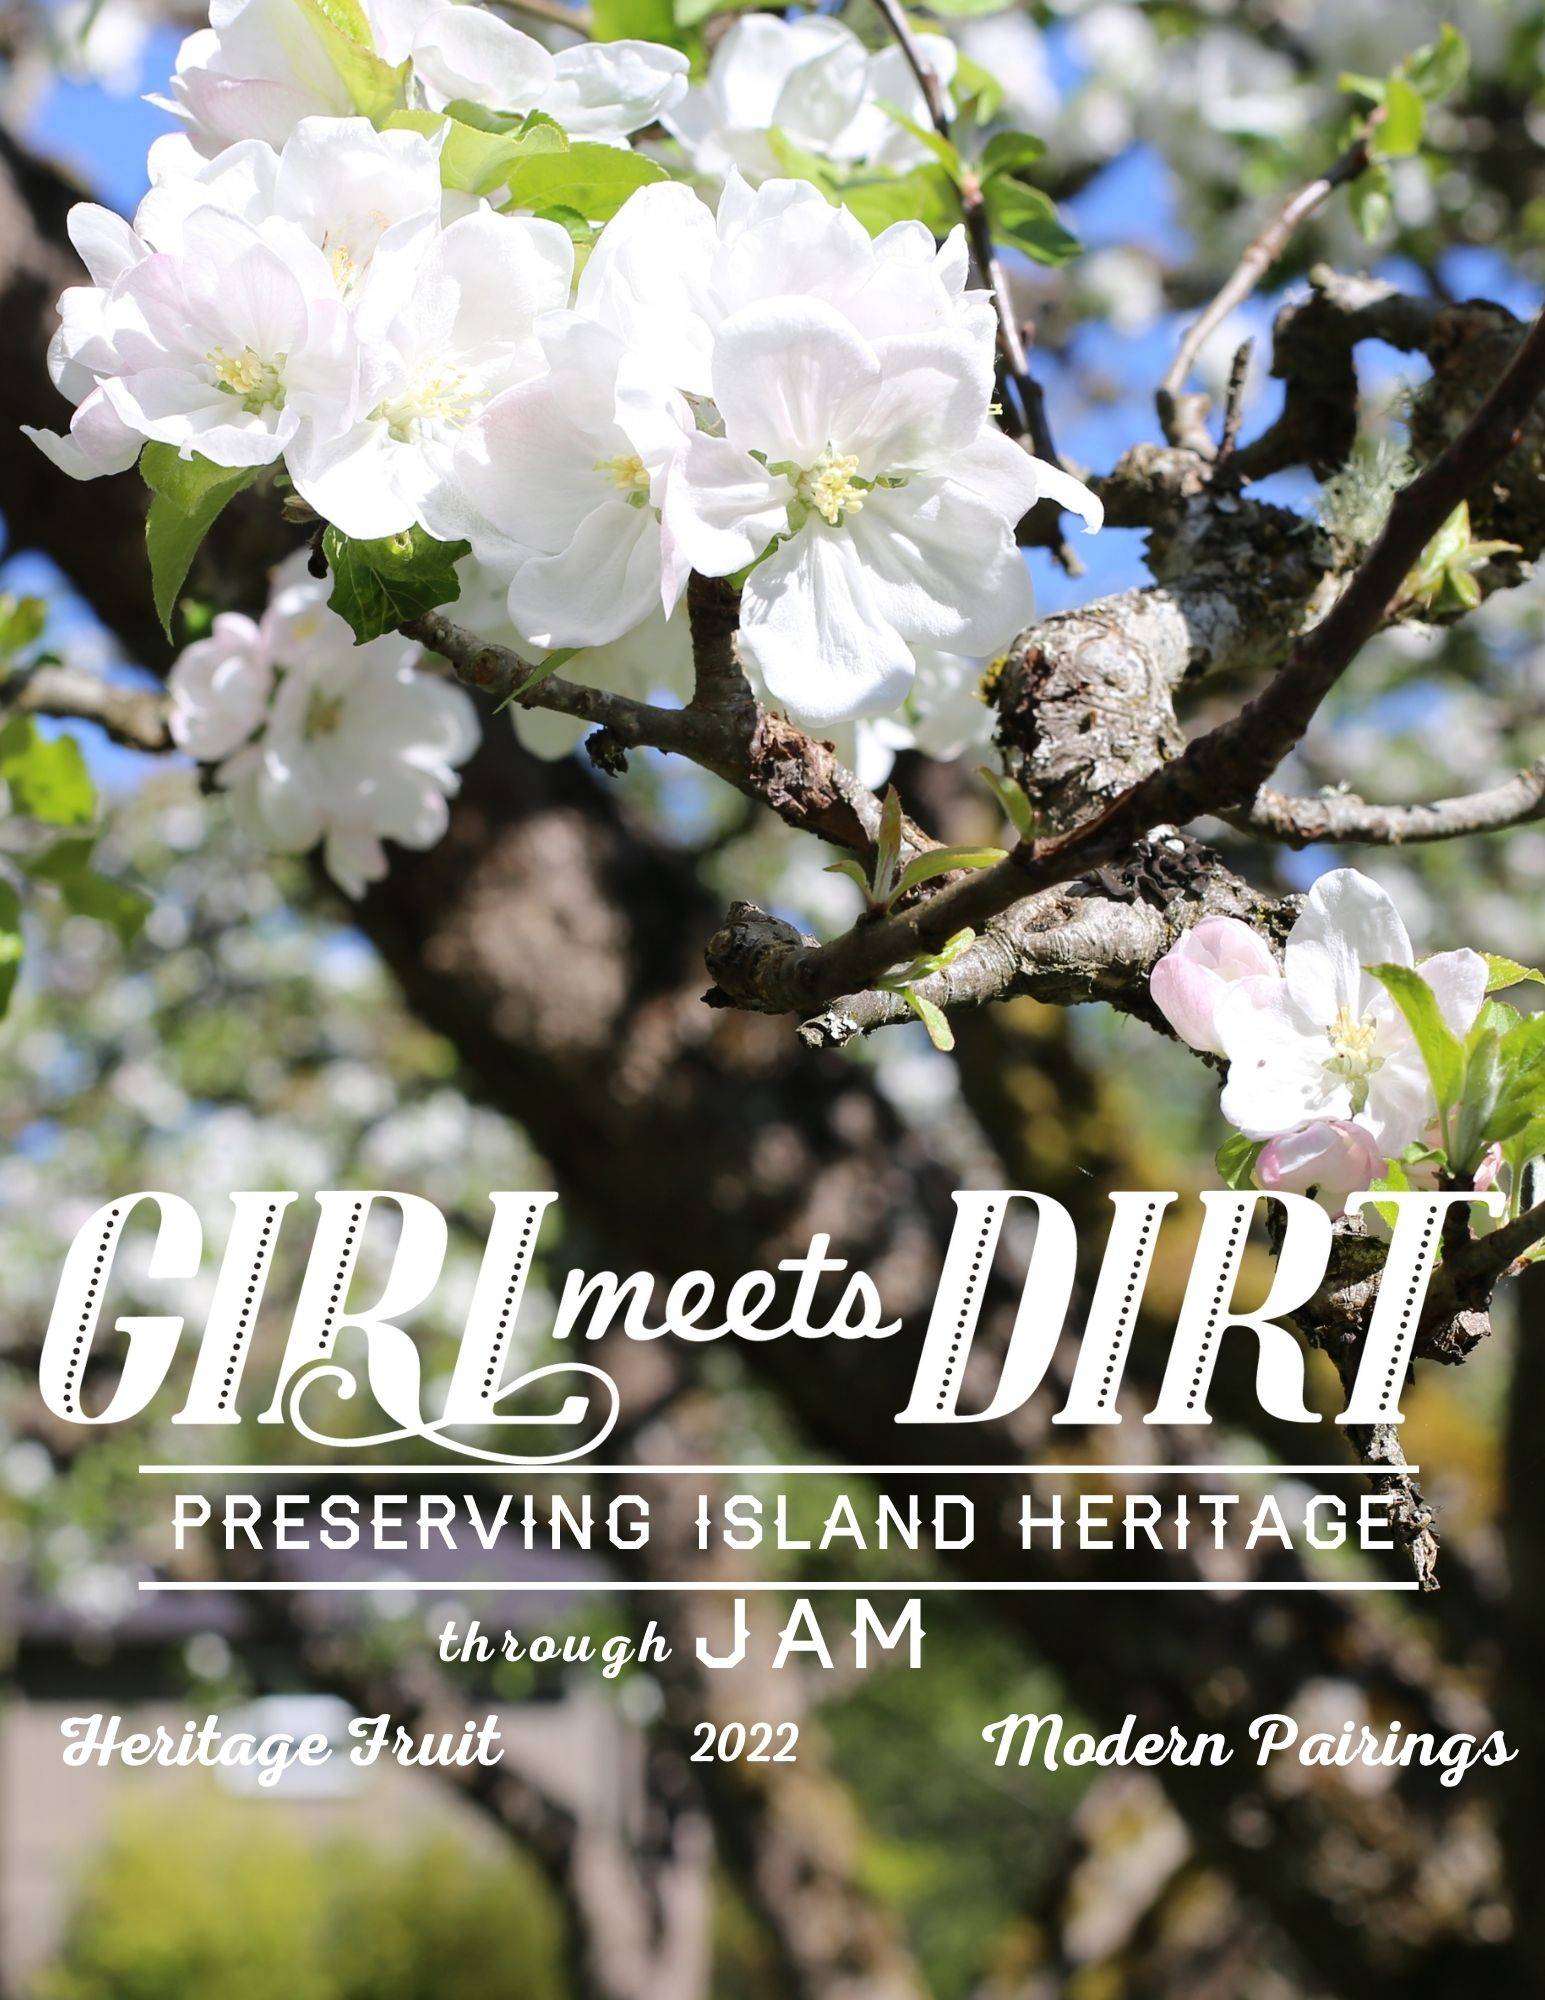 White Girl Meets Dirt logo in front of a picture of fruit tree branches with white blossoms. Text reads 